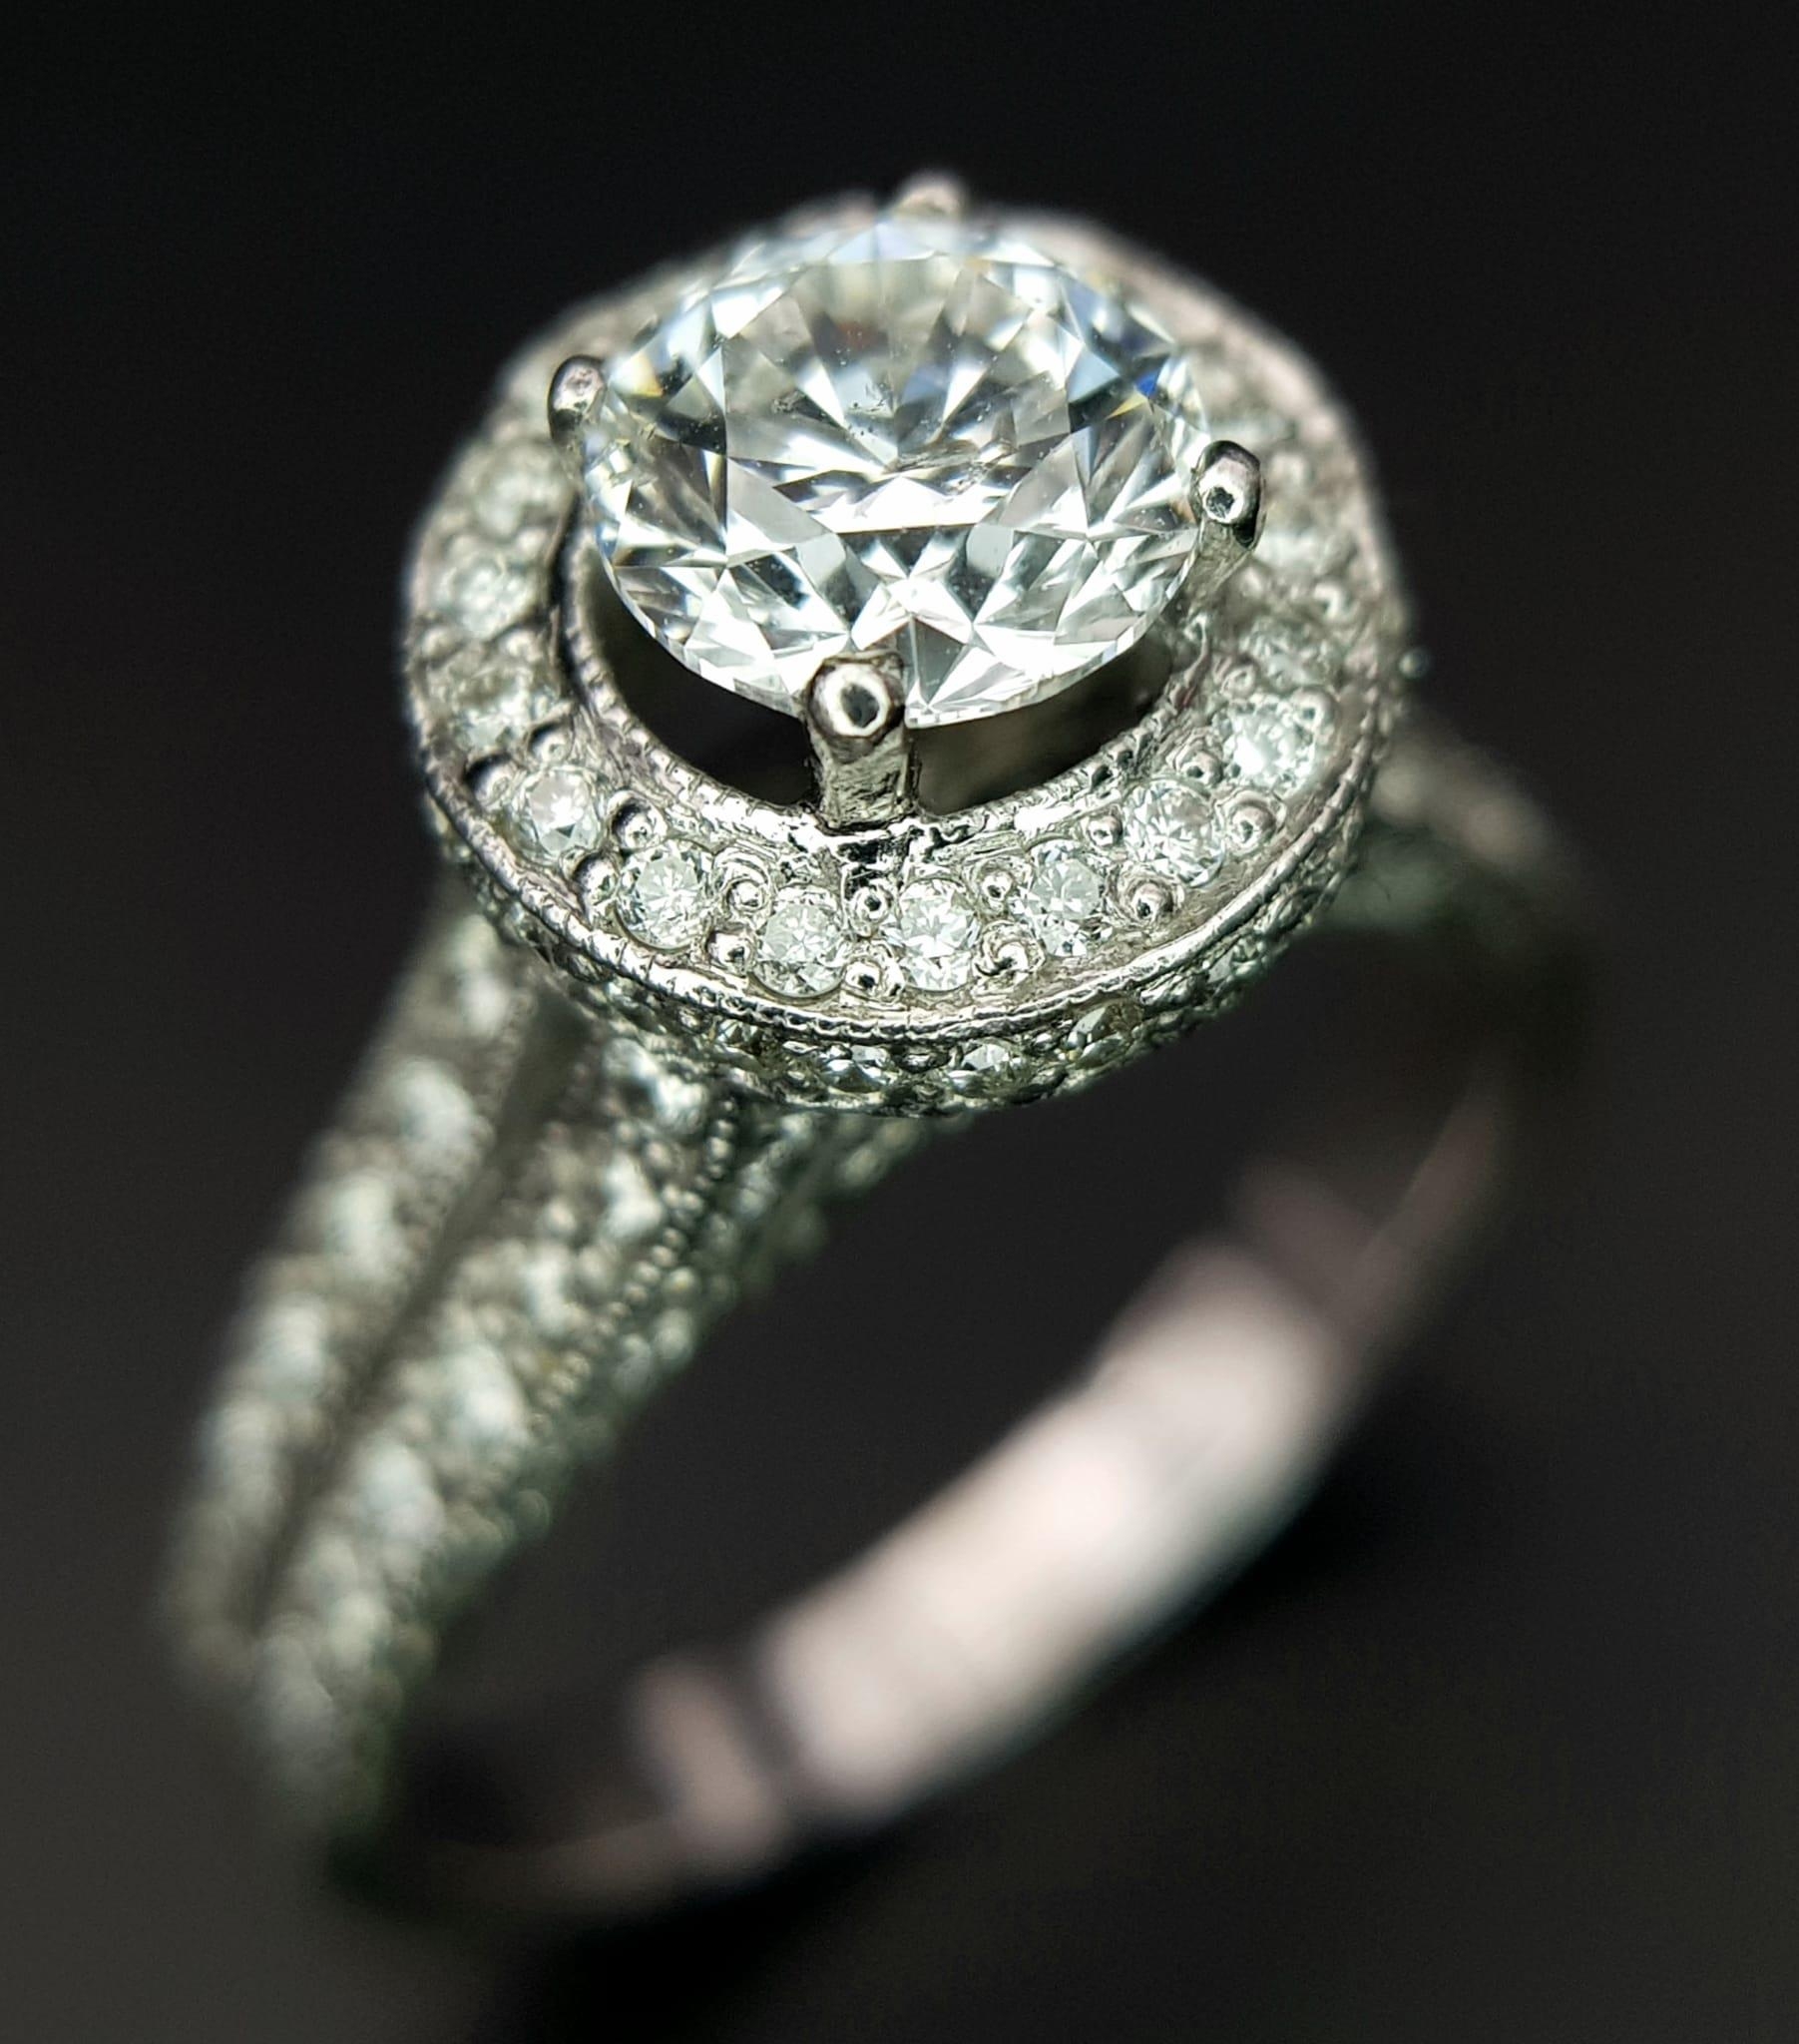 An 18 K white gold ring with a brilliant cut diamond (1.01 carats) surrounded by diamonds on the top - Image 2 of 22